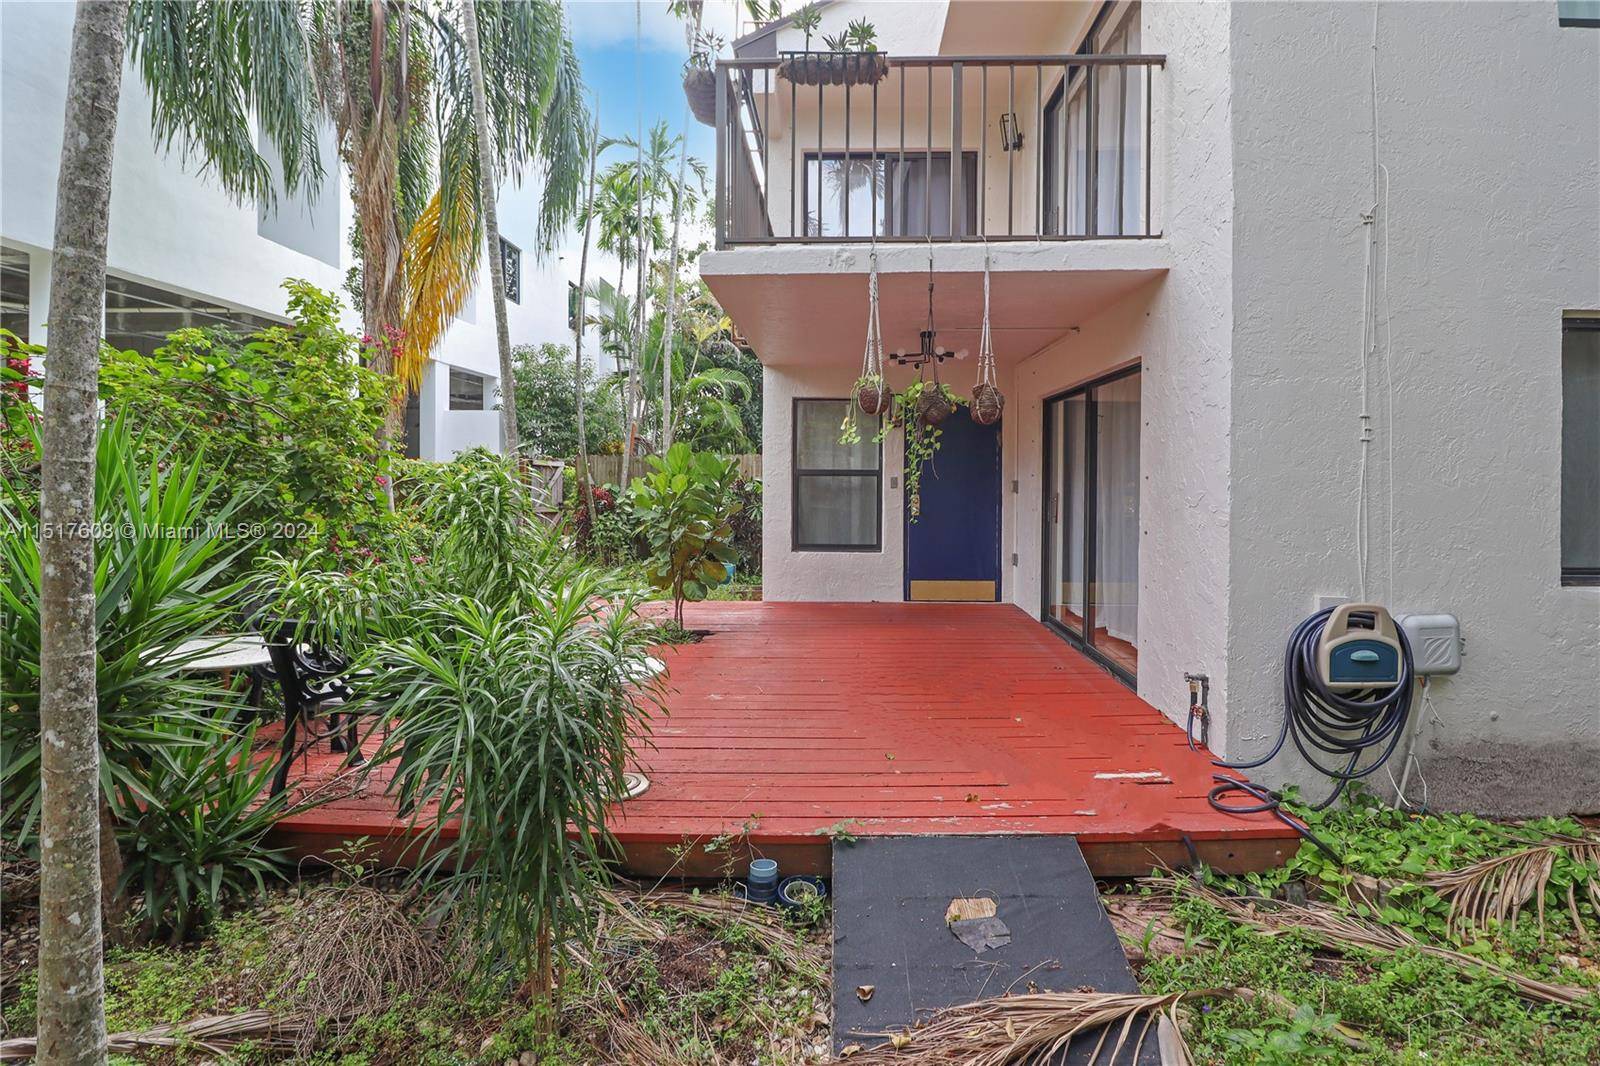 Immerse yourself in Coconut Grove living with this delightful 2 bedroom, 1.